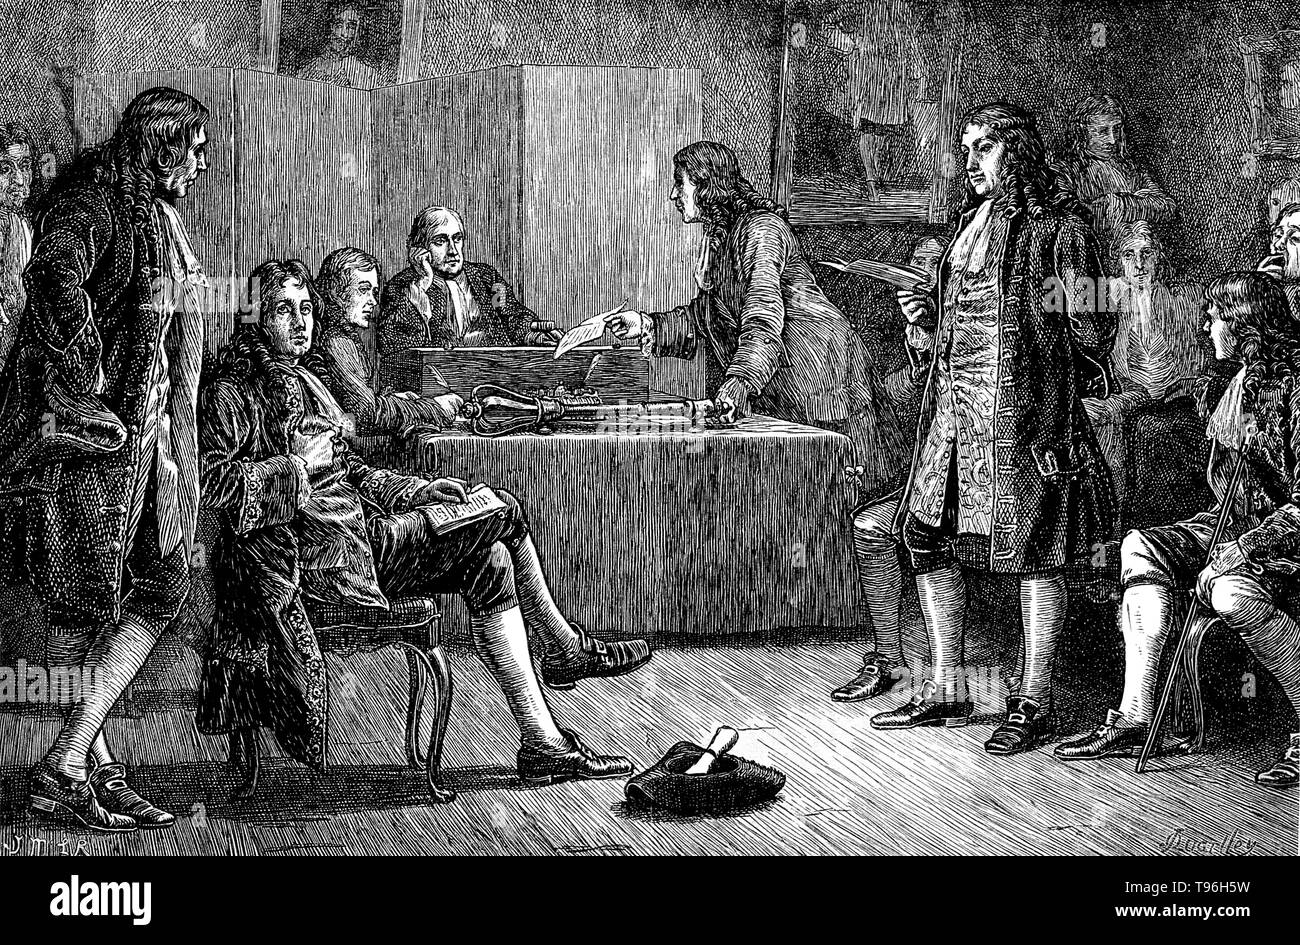 Royal Society, Crane Court, off Fleet Street, London: a meeting in progress, with Isaac Newton in the chair. Isaac Newton (December 25, 1642 - March 20, 1727) was an English physicist, mathematician, astronomer, natural philosopher, alchemist, and theologian. His monograph ''Philosophiae Naturalis Principia Mathematica'', published in 1687, lays the foundations for most of classical mechanics. In this work, Newton described universal gravitation and the three laws of motion, which dominated the scientific view of the physical universe for the next three centuries. Newton built the first practi Stock Photo